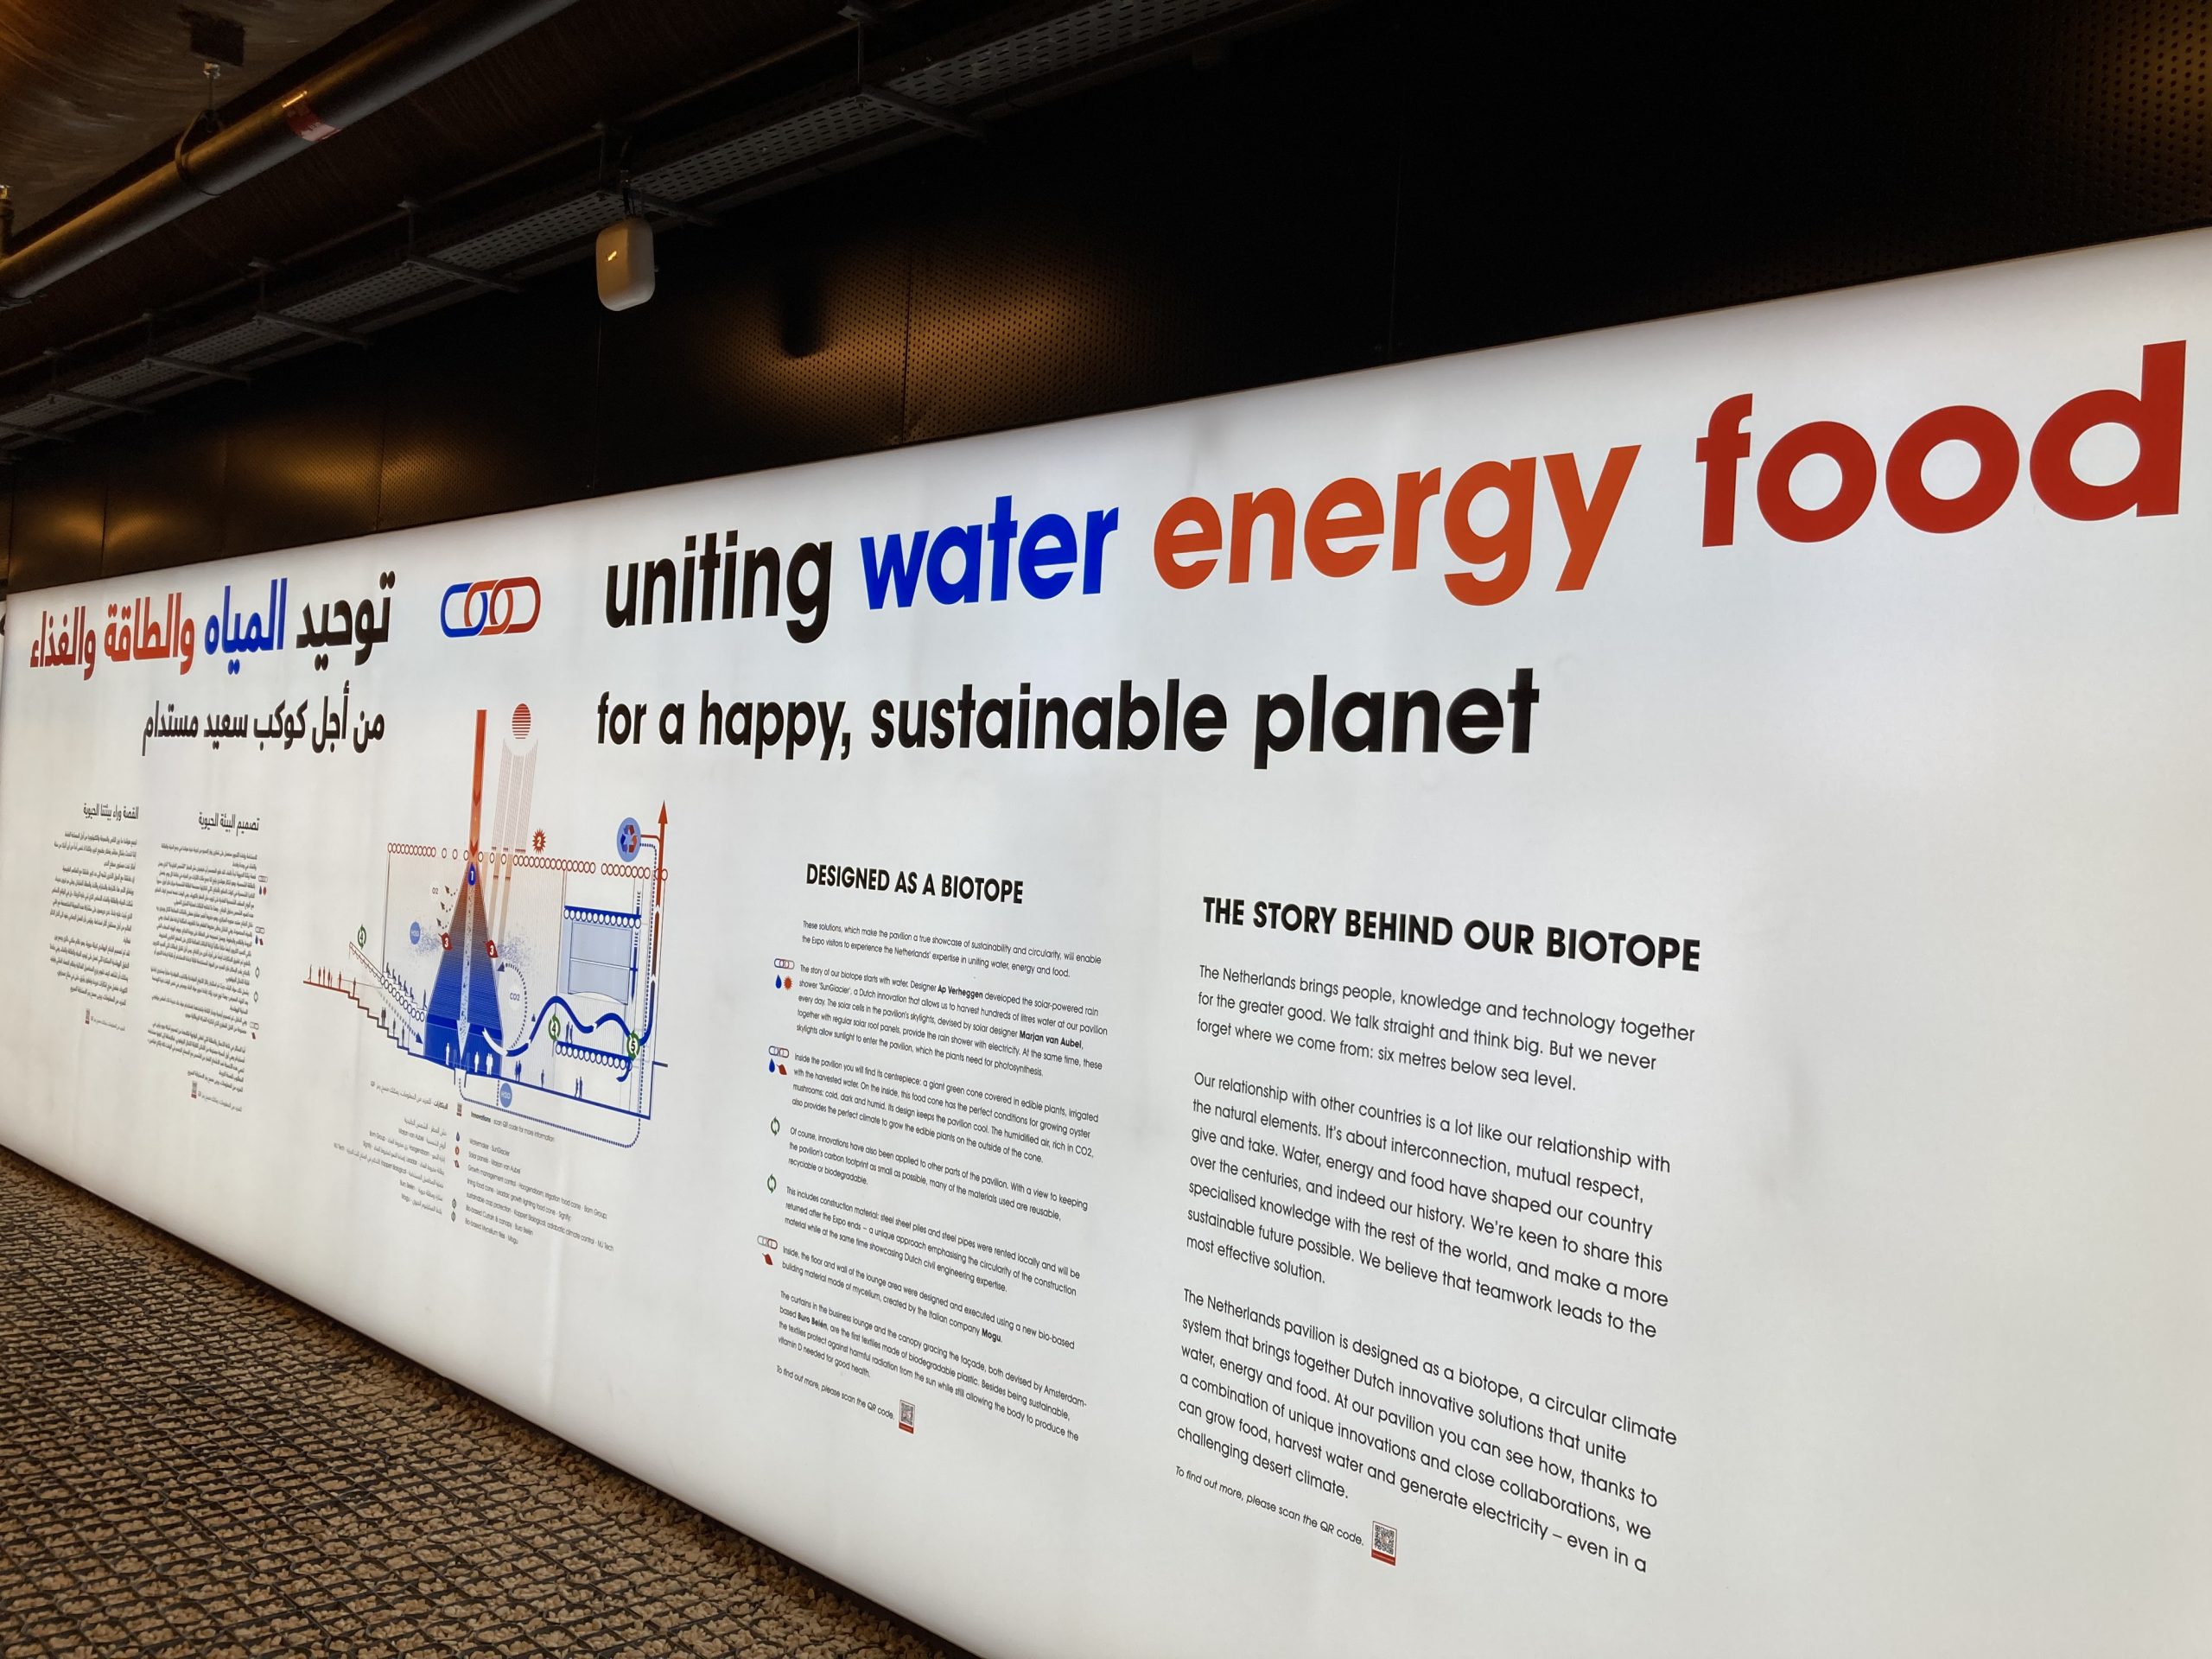 Expo2020 Uniting water energy food